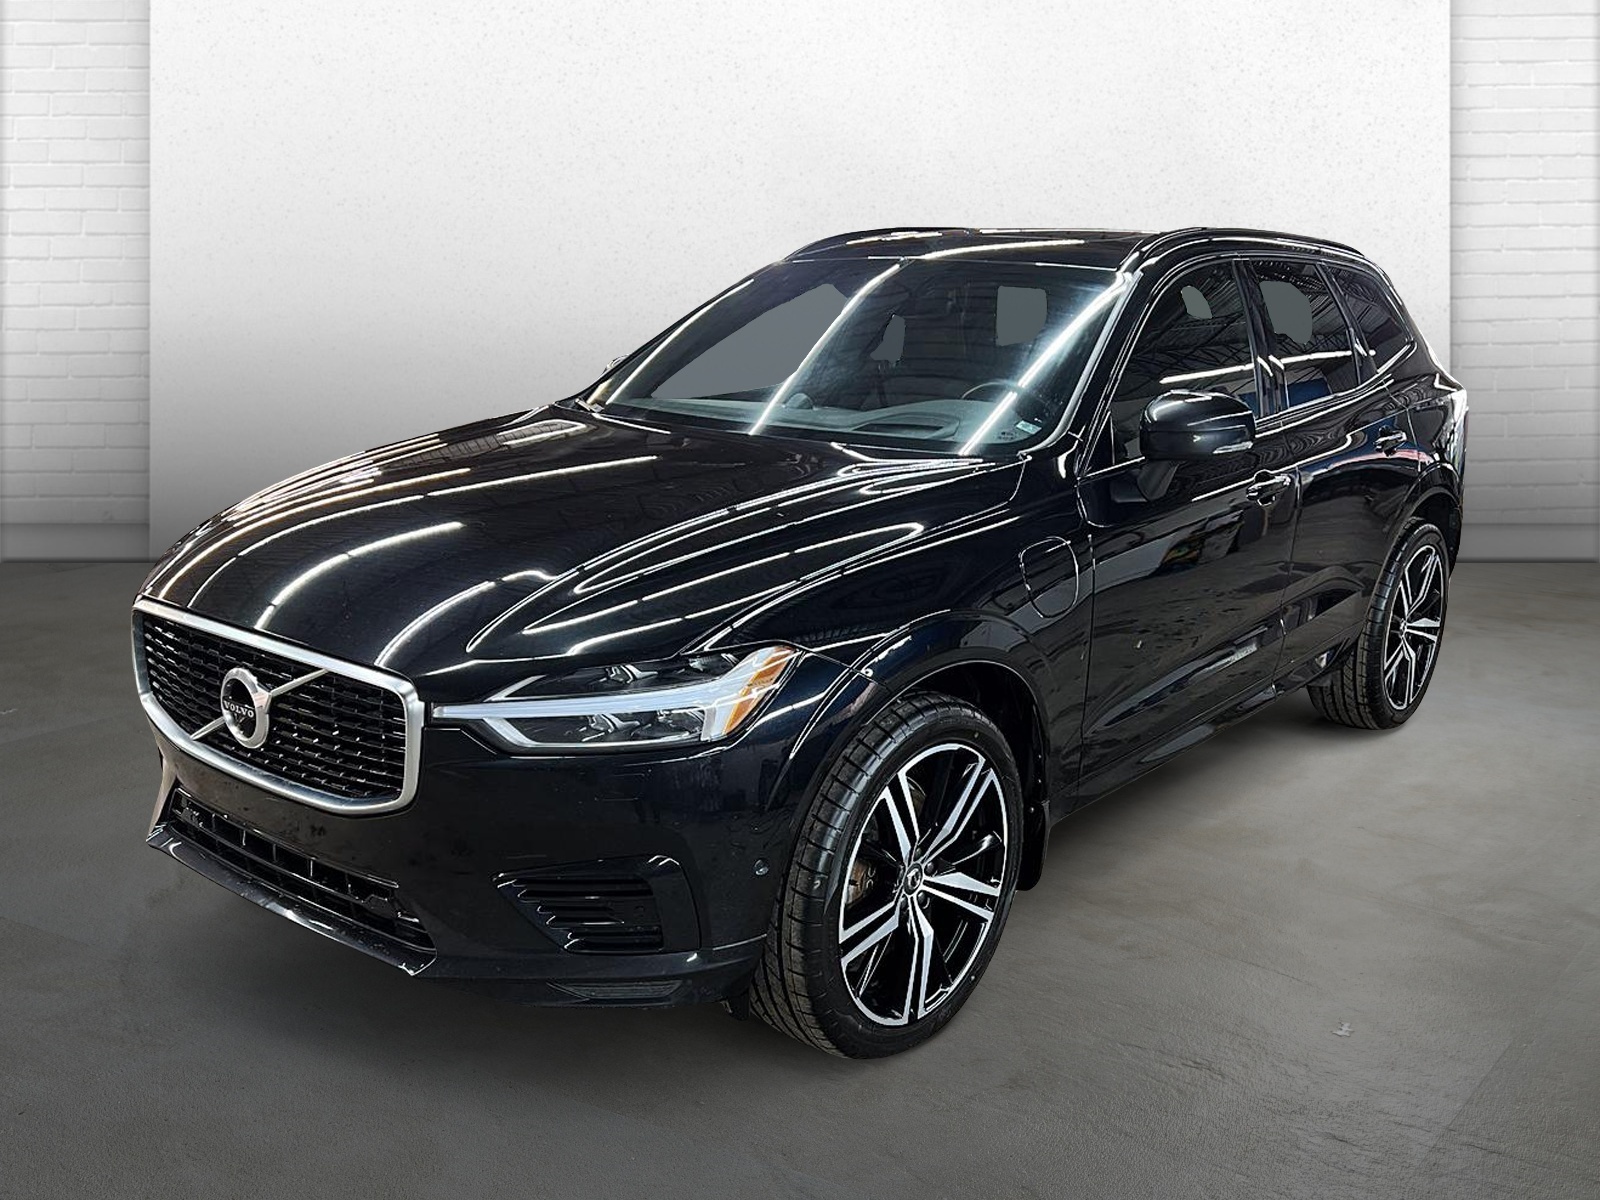 2020 Volvo XC60 T8 R-Design hybride rechargeable eAWD